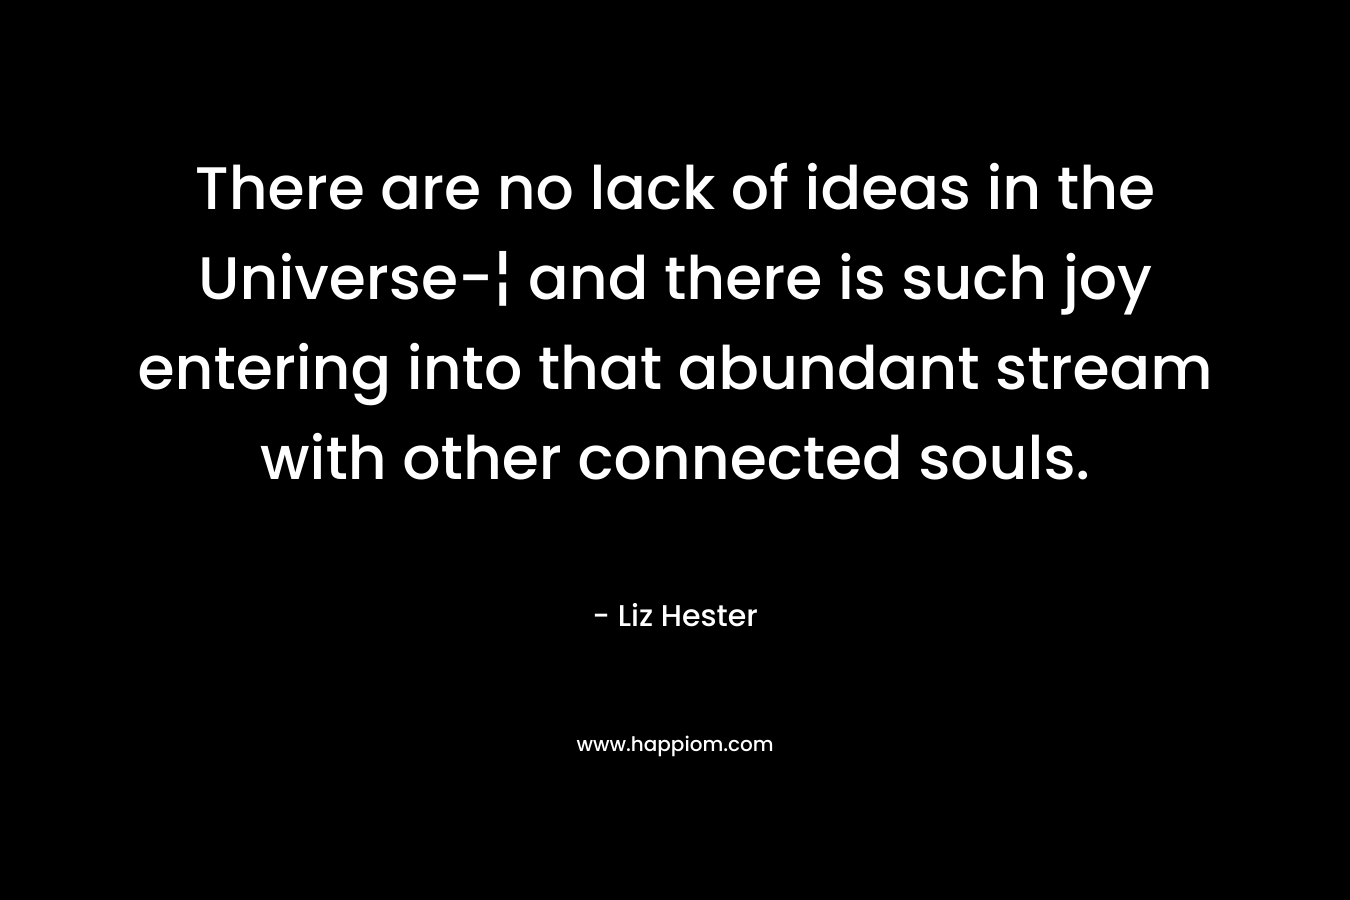 There are no lack of ideas in the Universe-¦ and there is such joy entering into that abundant stream with other connected souls. – Liz Hester